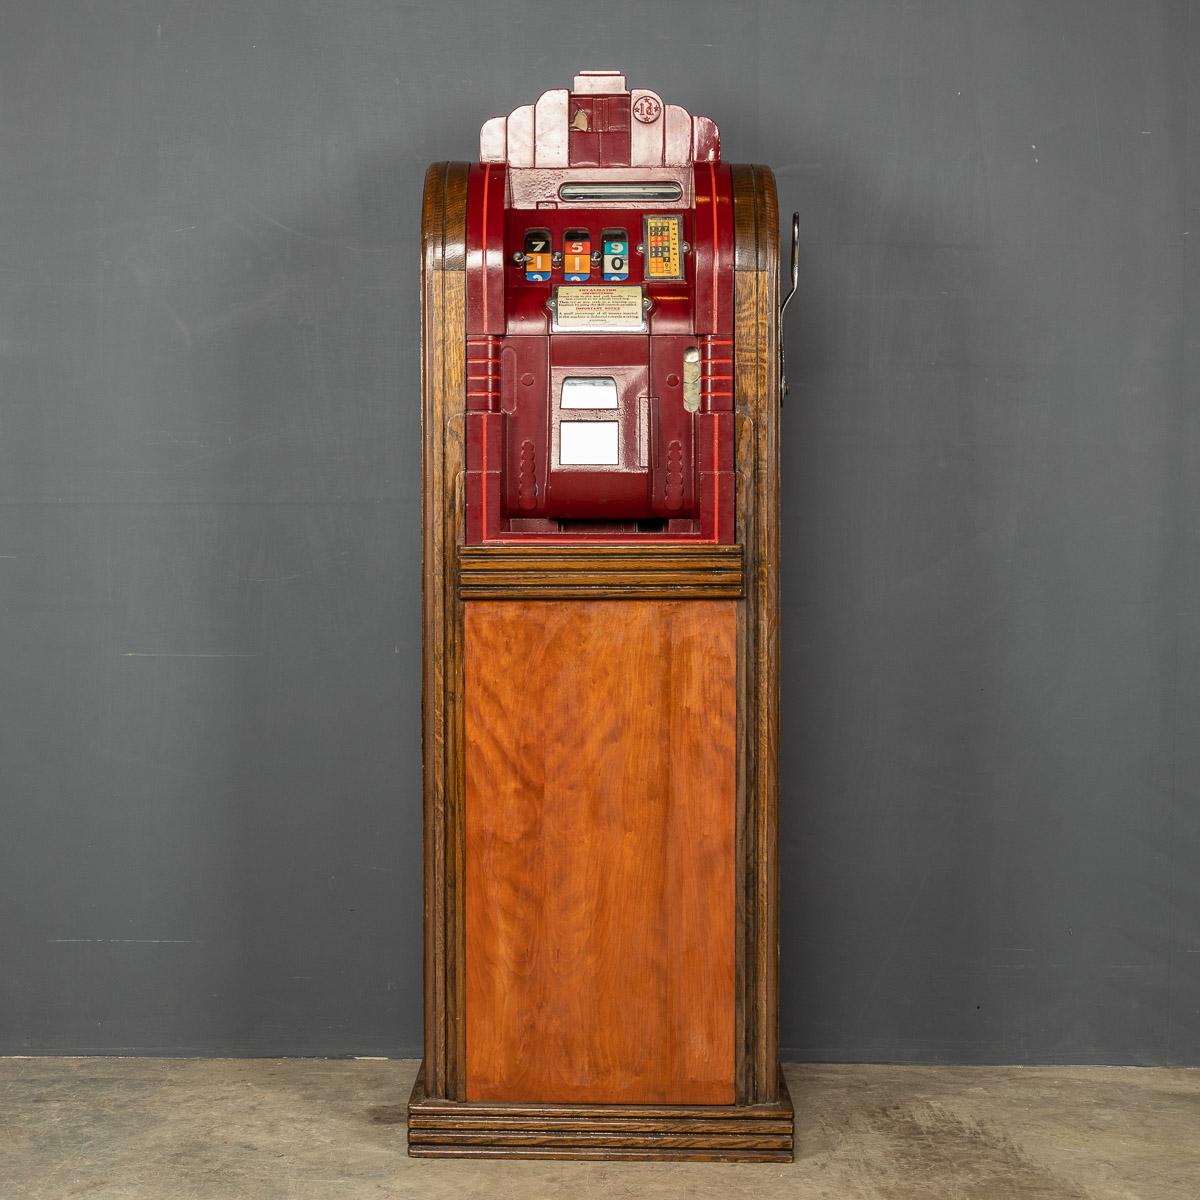 Antique early-20th Century “Totalisator” slot machine made in cast iron and housed in an oak cabinet. This machine works using old pennies and is made in the USA by Mills Novelty Co of Chicago and distributed all over Europe by the Samson Novelty